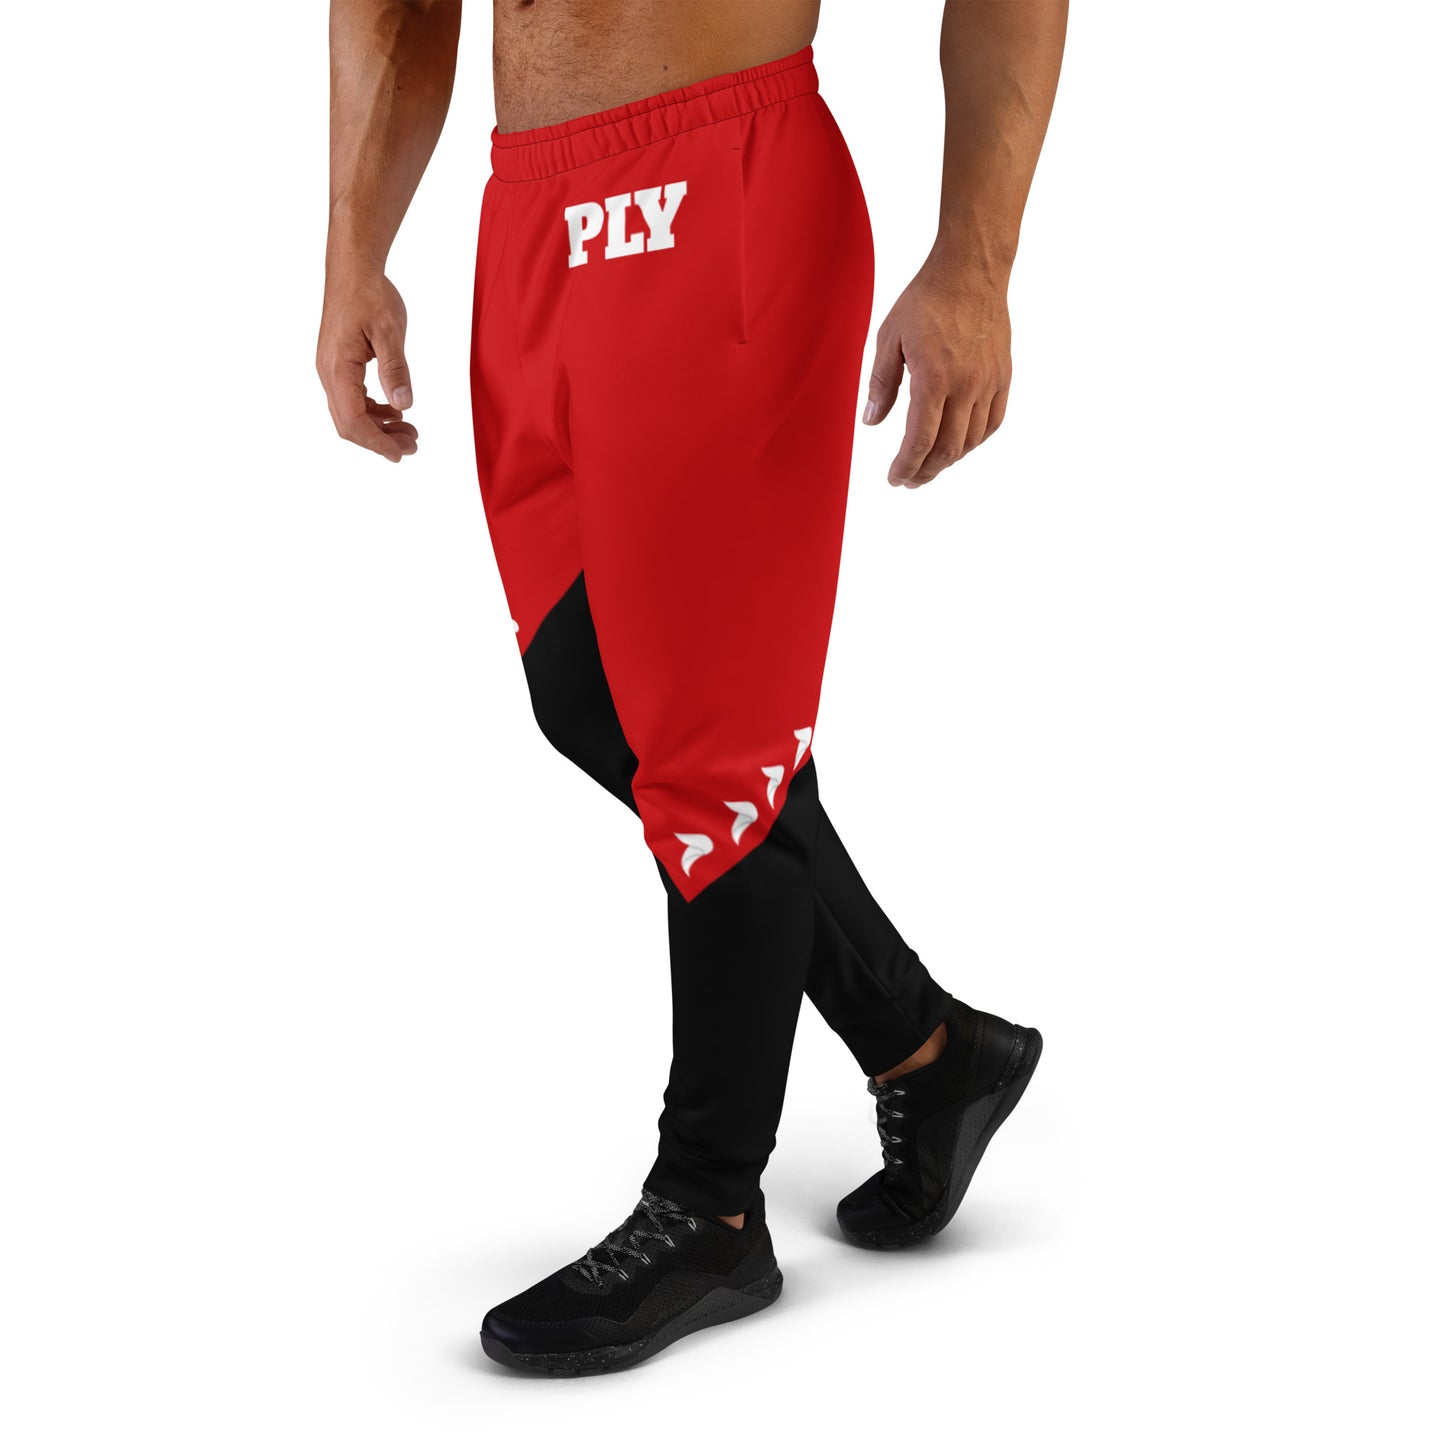 PLY - Joggers Red & Black - Men